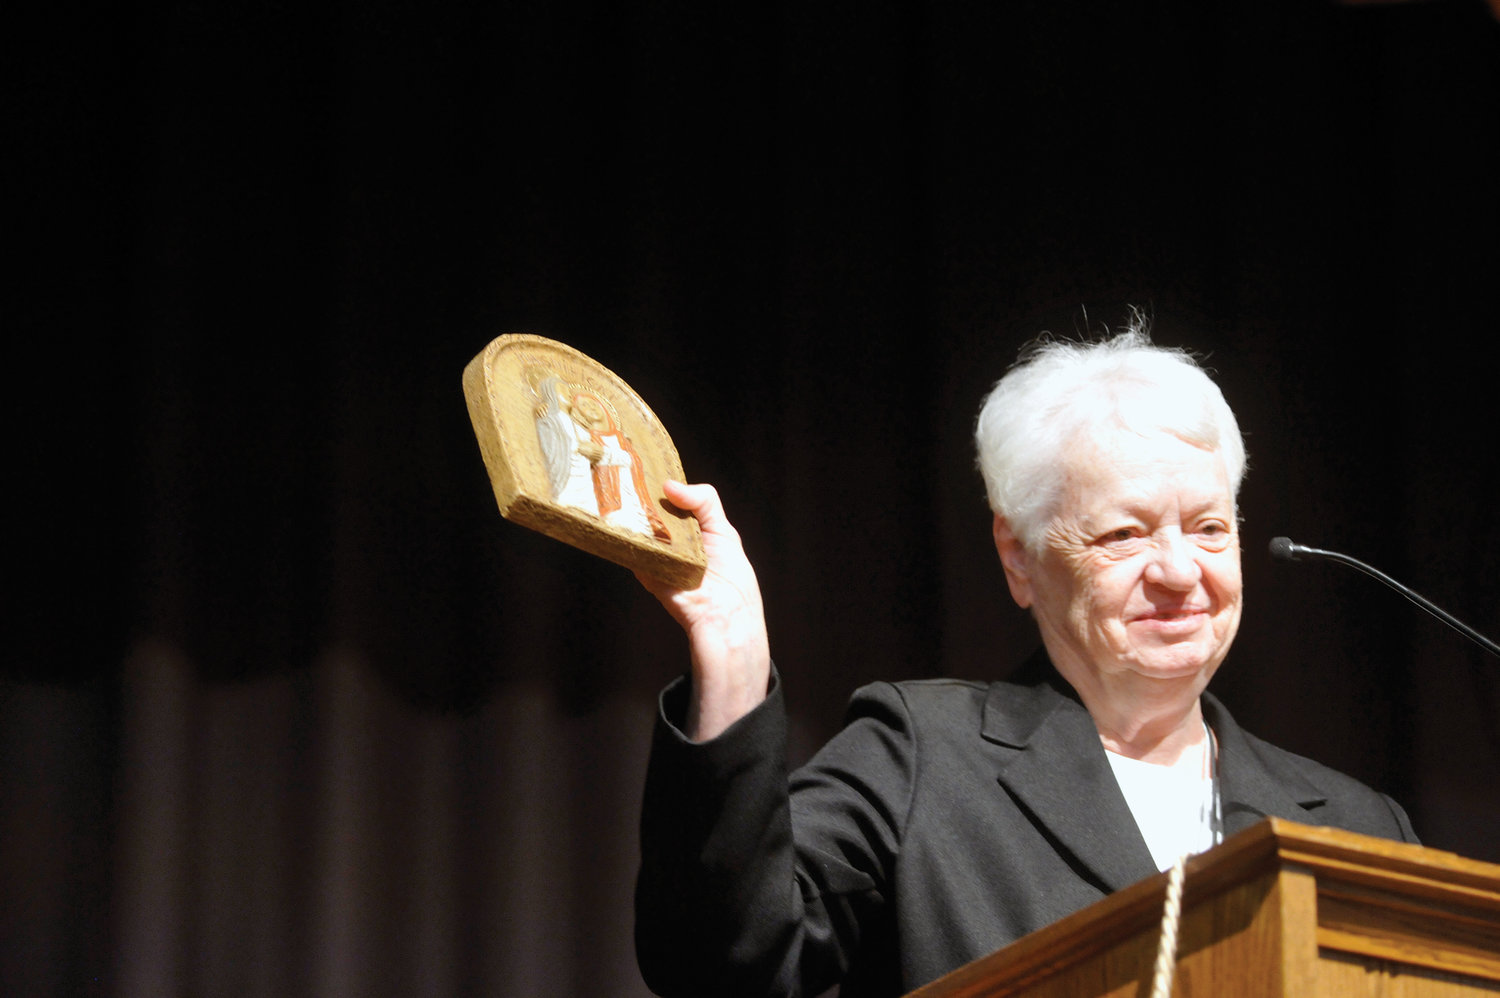 Sister Joan Curtin, C.N.D., holds up the Magnificat Award named in her honor that she received Oct. 15 at the annual forum for catechesis and youth ministry.  Now the vicar for religious in the archdiocese, Sister Joan was the director of archdiocesan Catechetical Office for more than three decades.